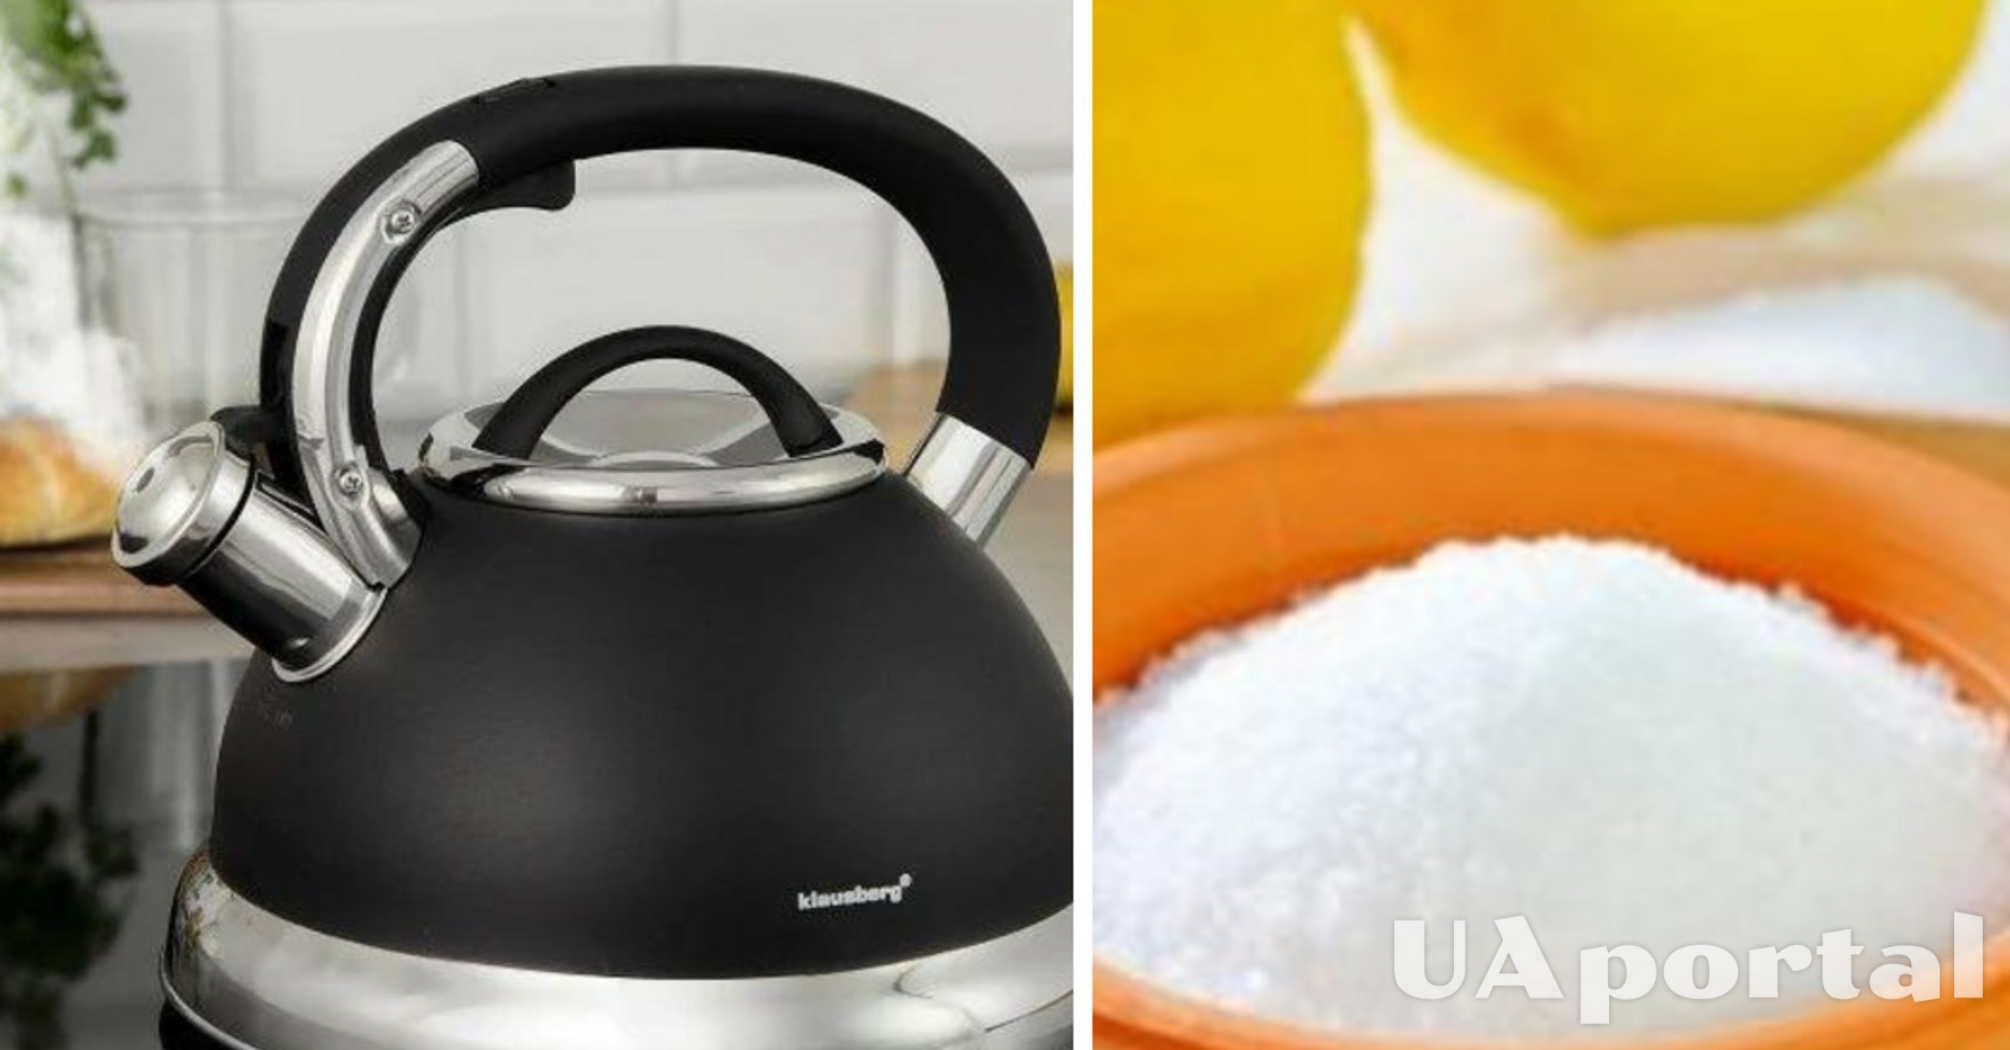 Citric acid and vinegar: how to easily descale a kettle